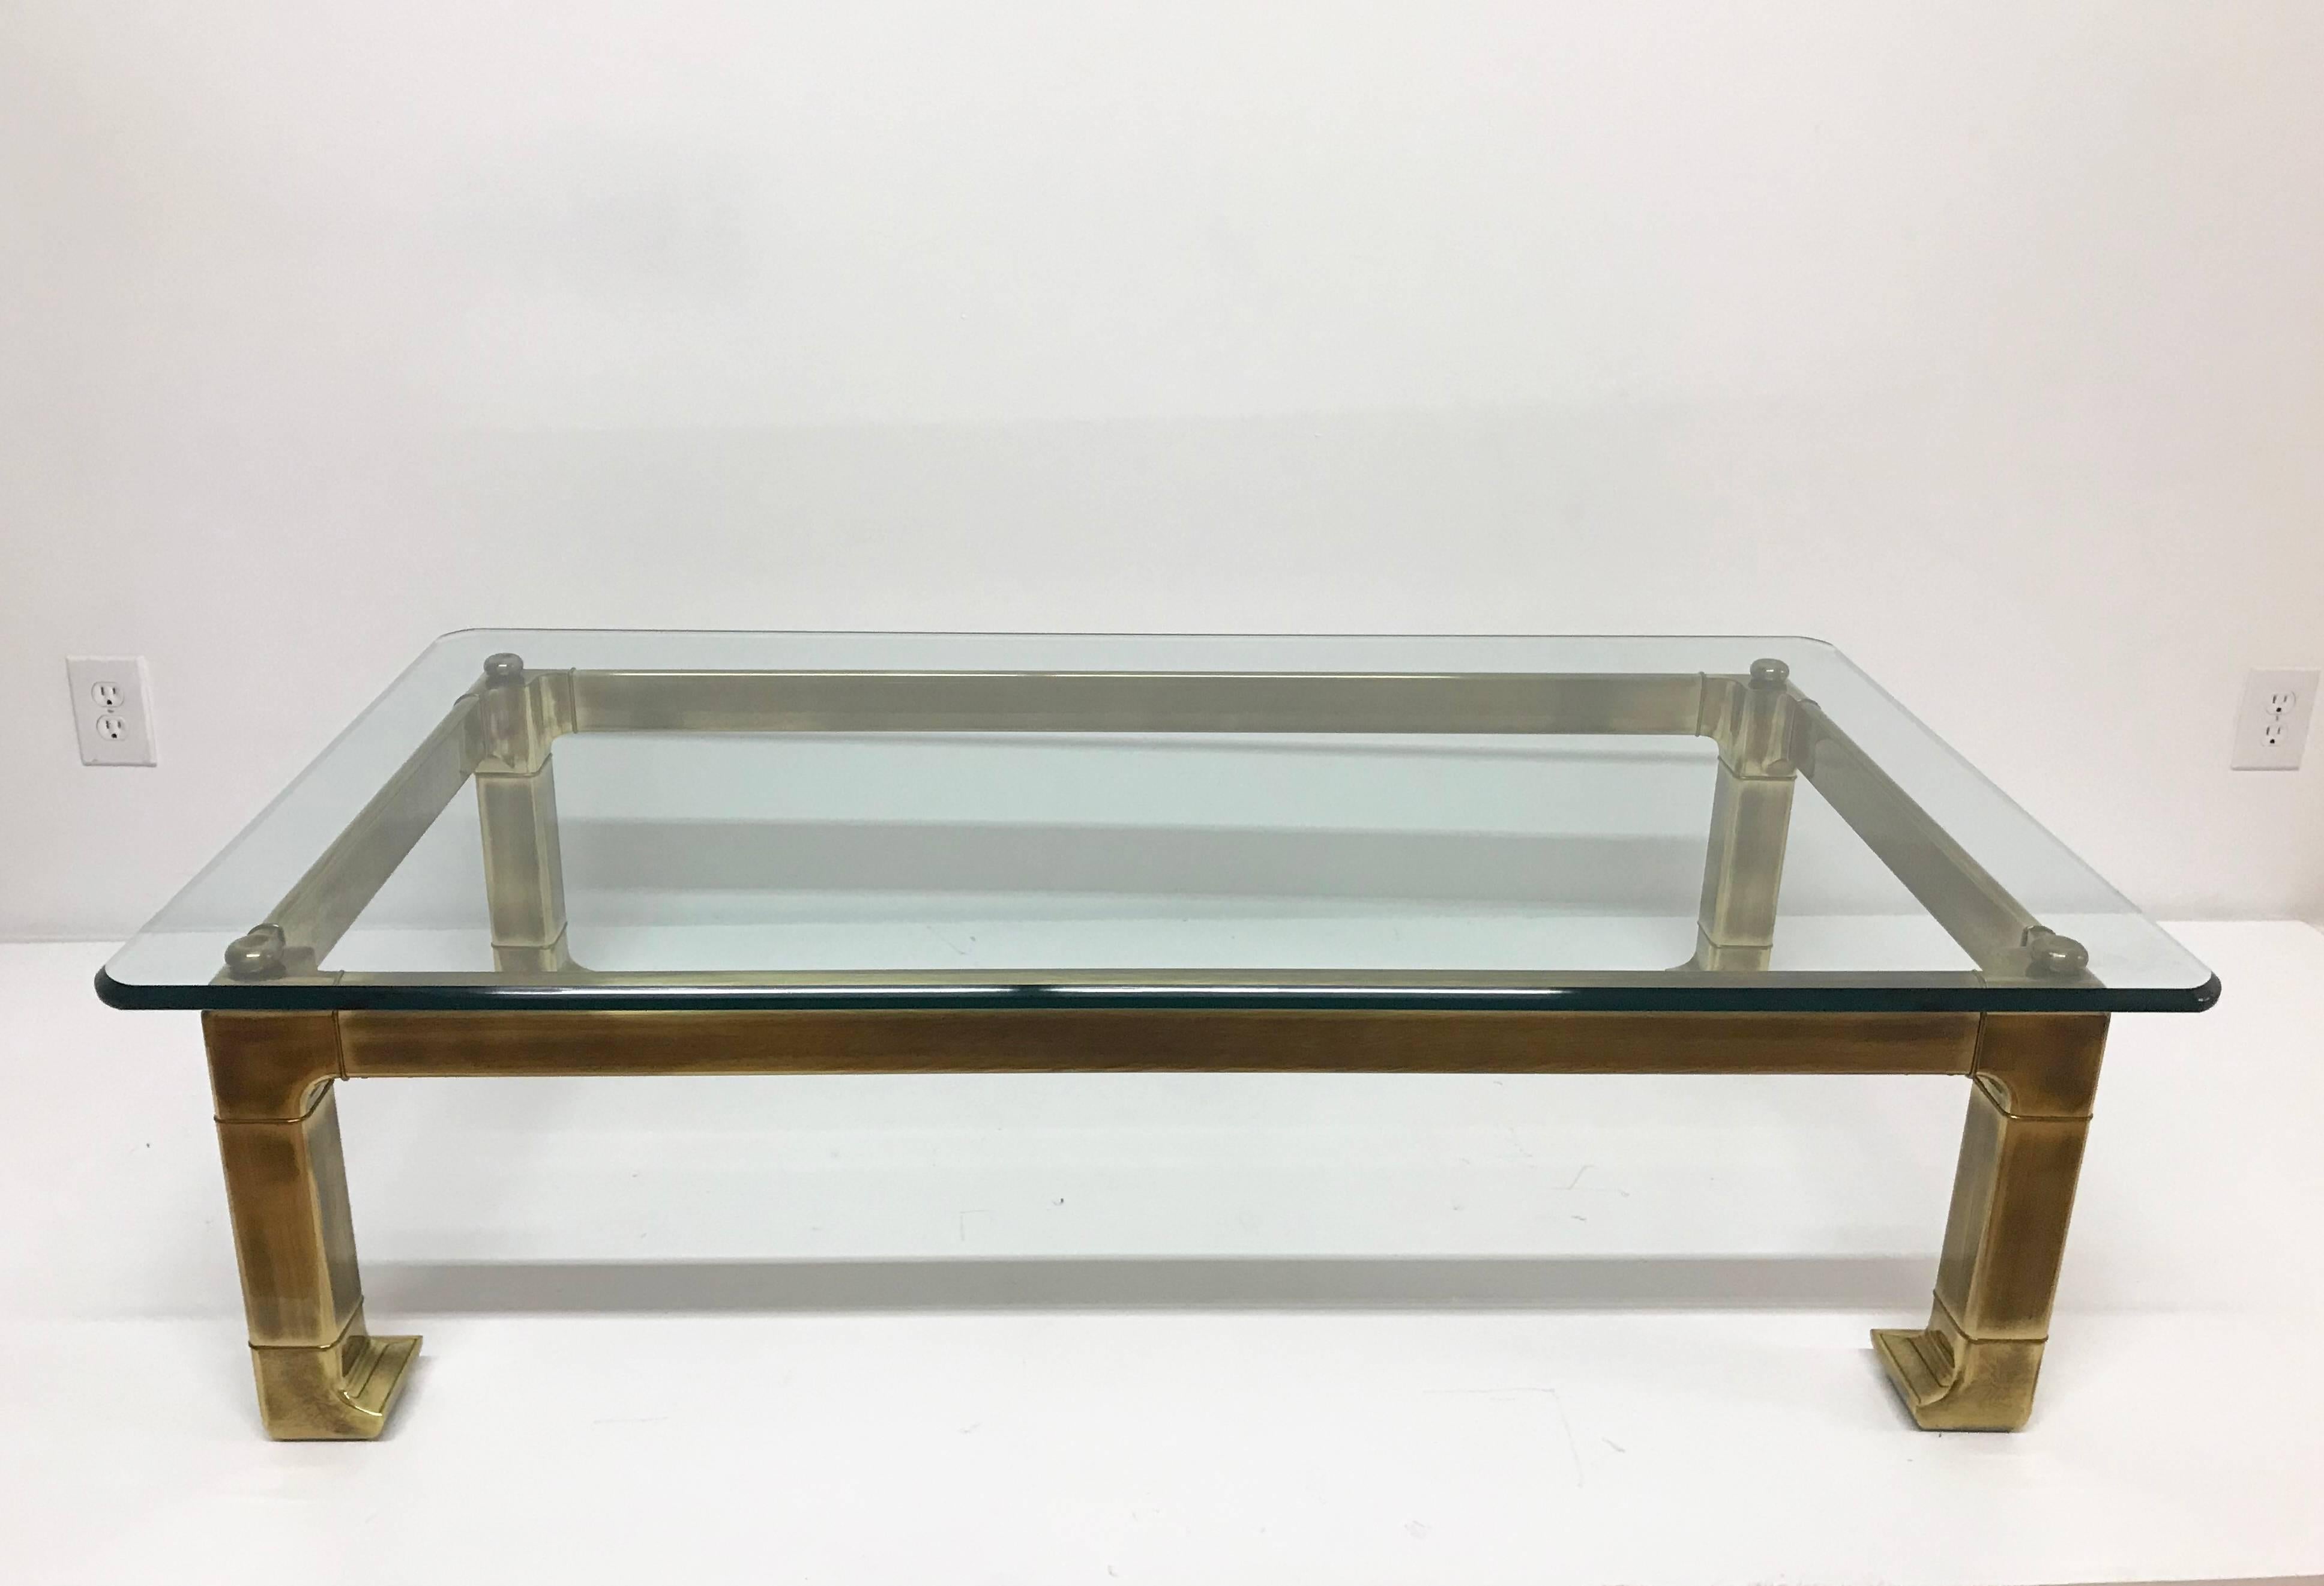 Incredible lacquered brass coffee table with Asian styling and original double thick 3/4 in. glass. Beautiful patina. Both glass and frame in excellent original condition. Hollywood Regency style.